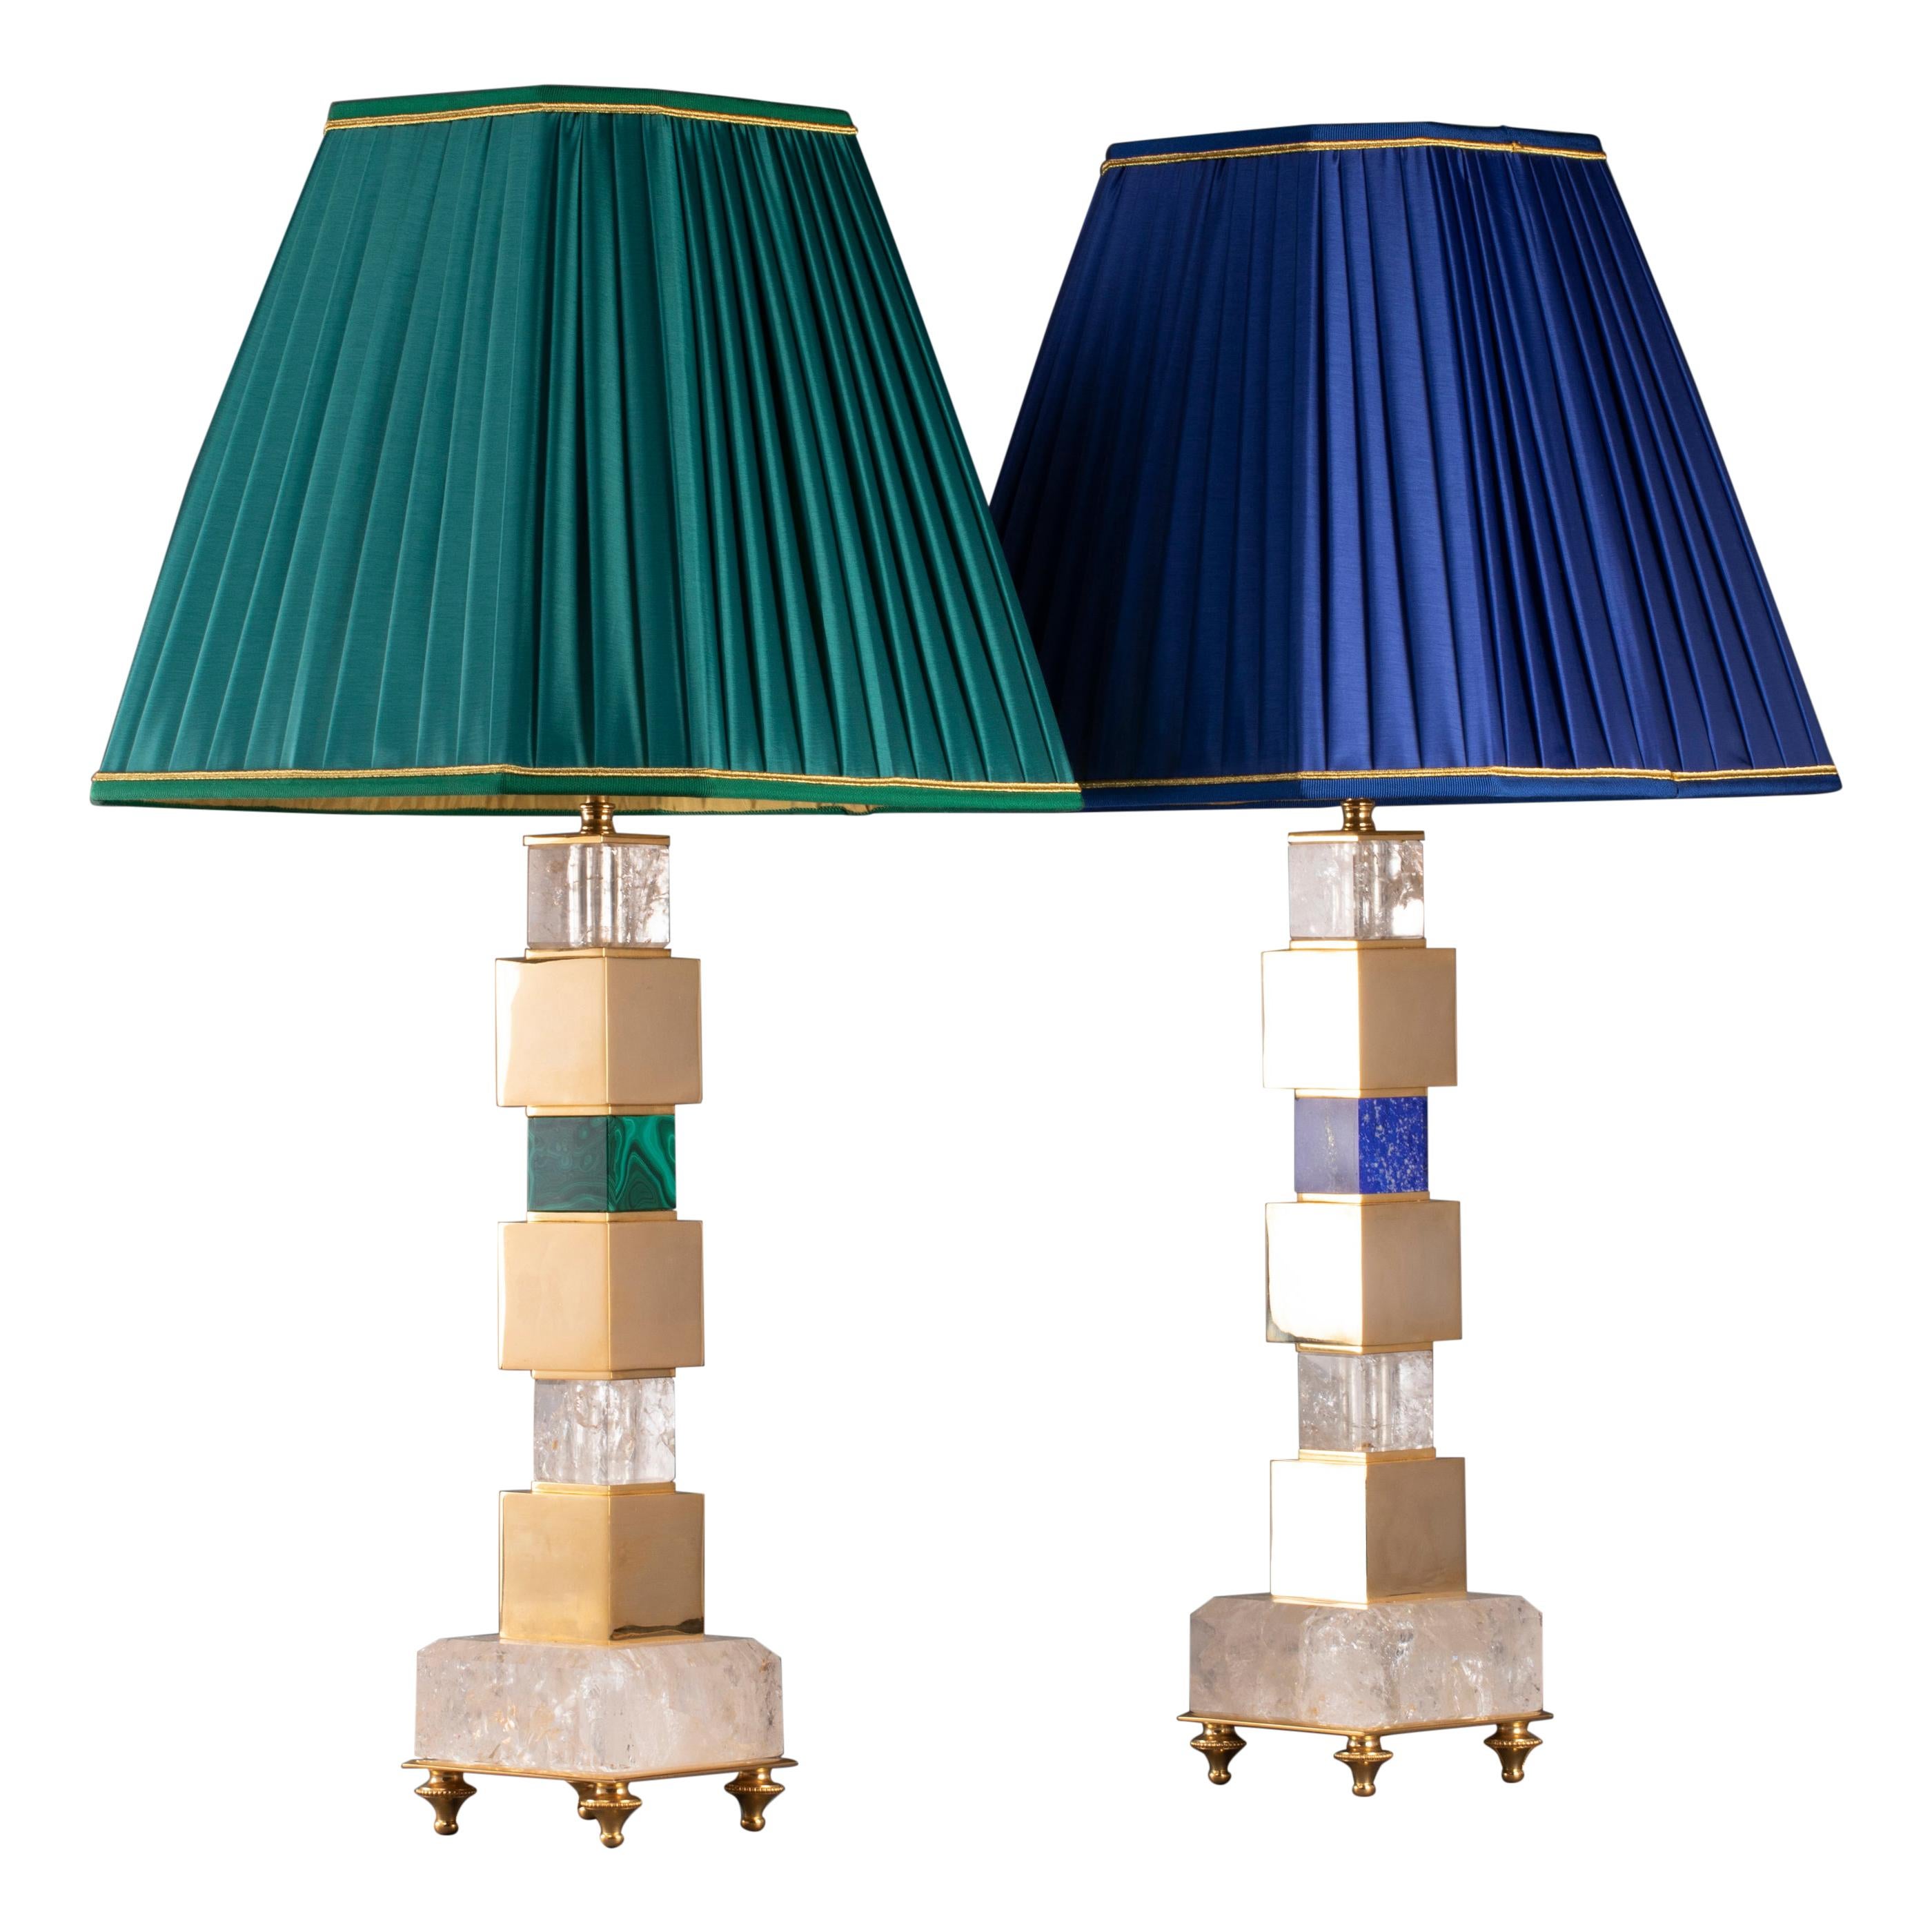 Pair of Rock Crystal and Malachite and Lapis Lazuli Lamps by Alexandre Vossion